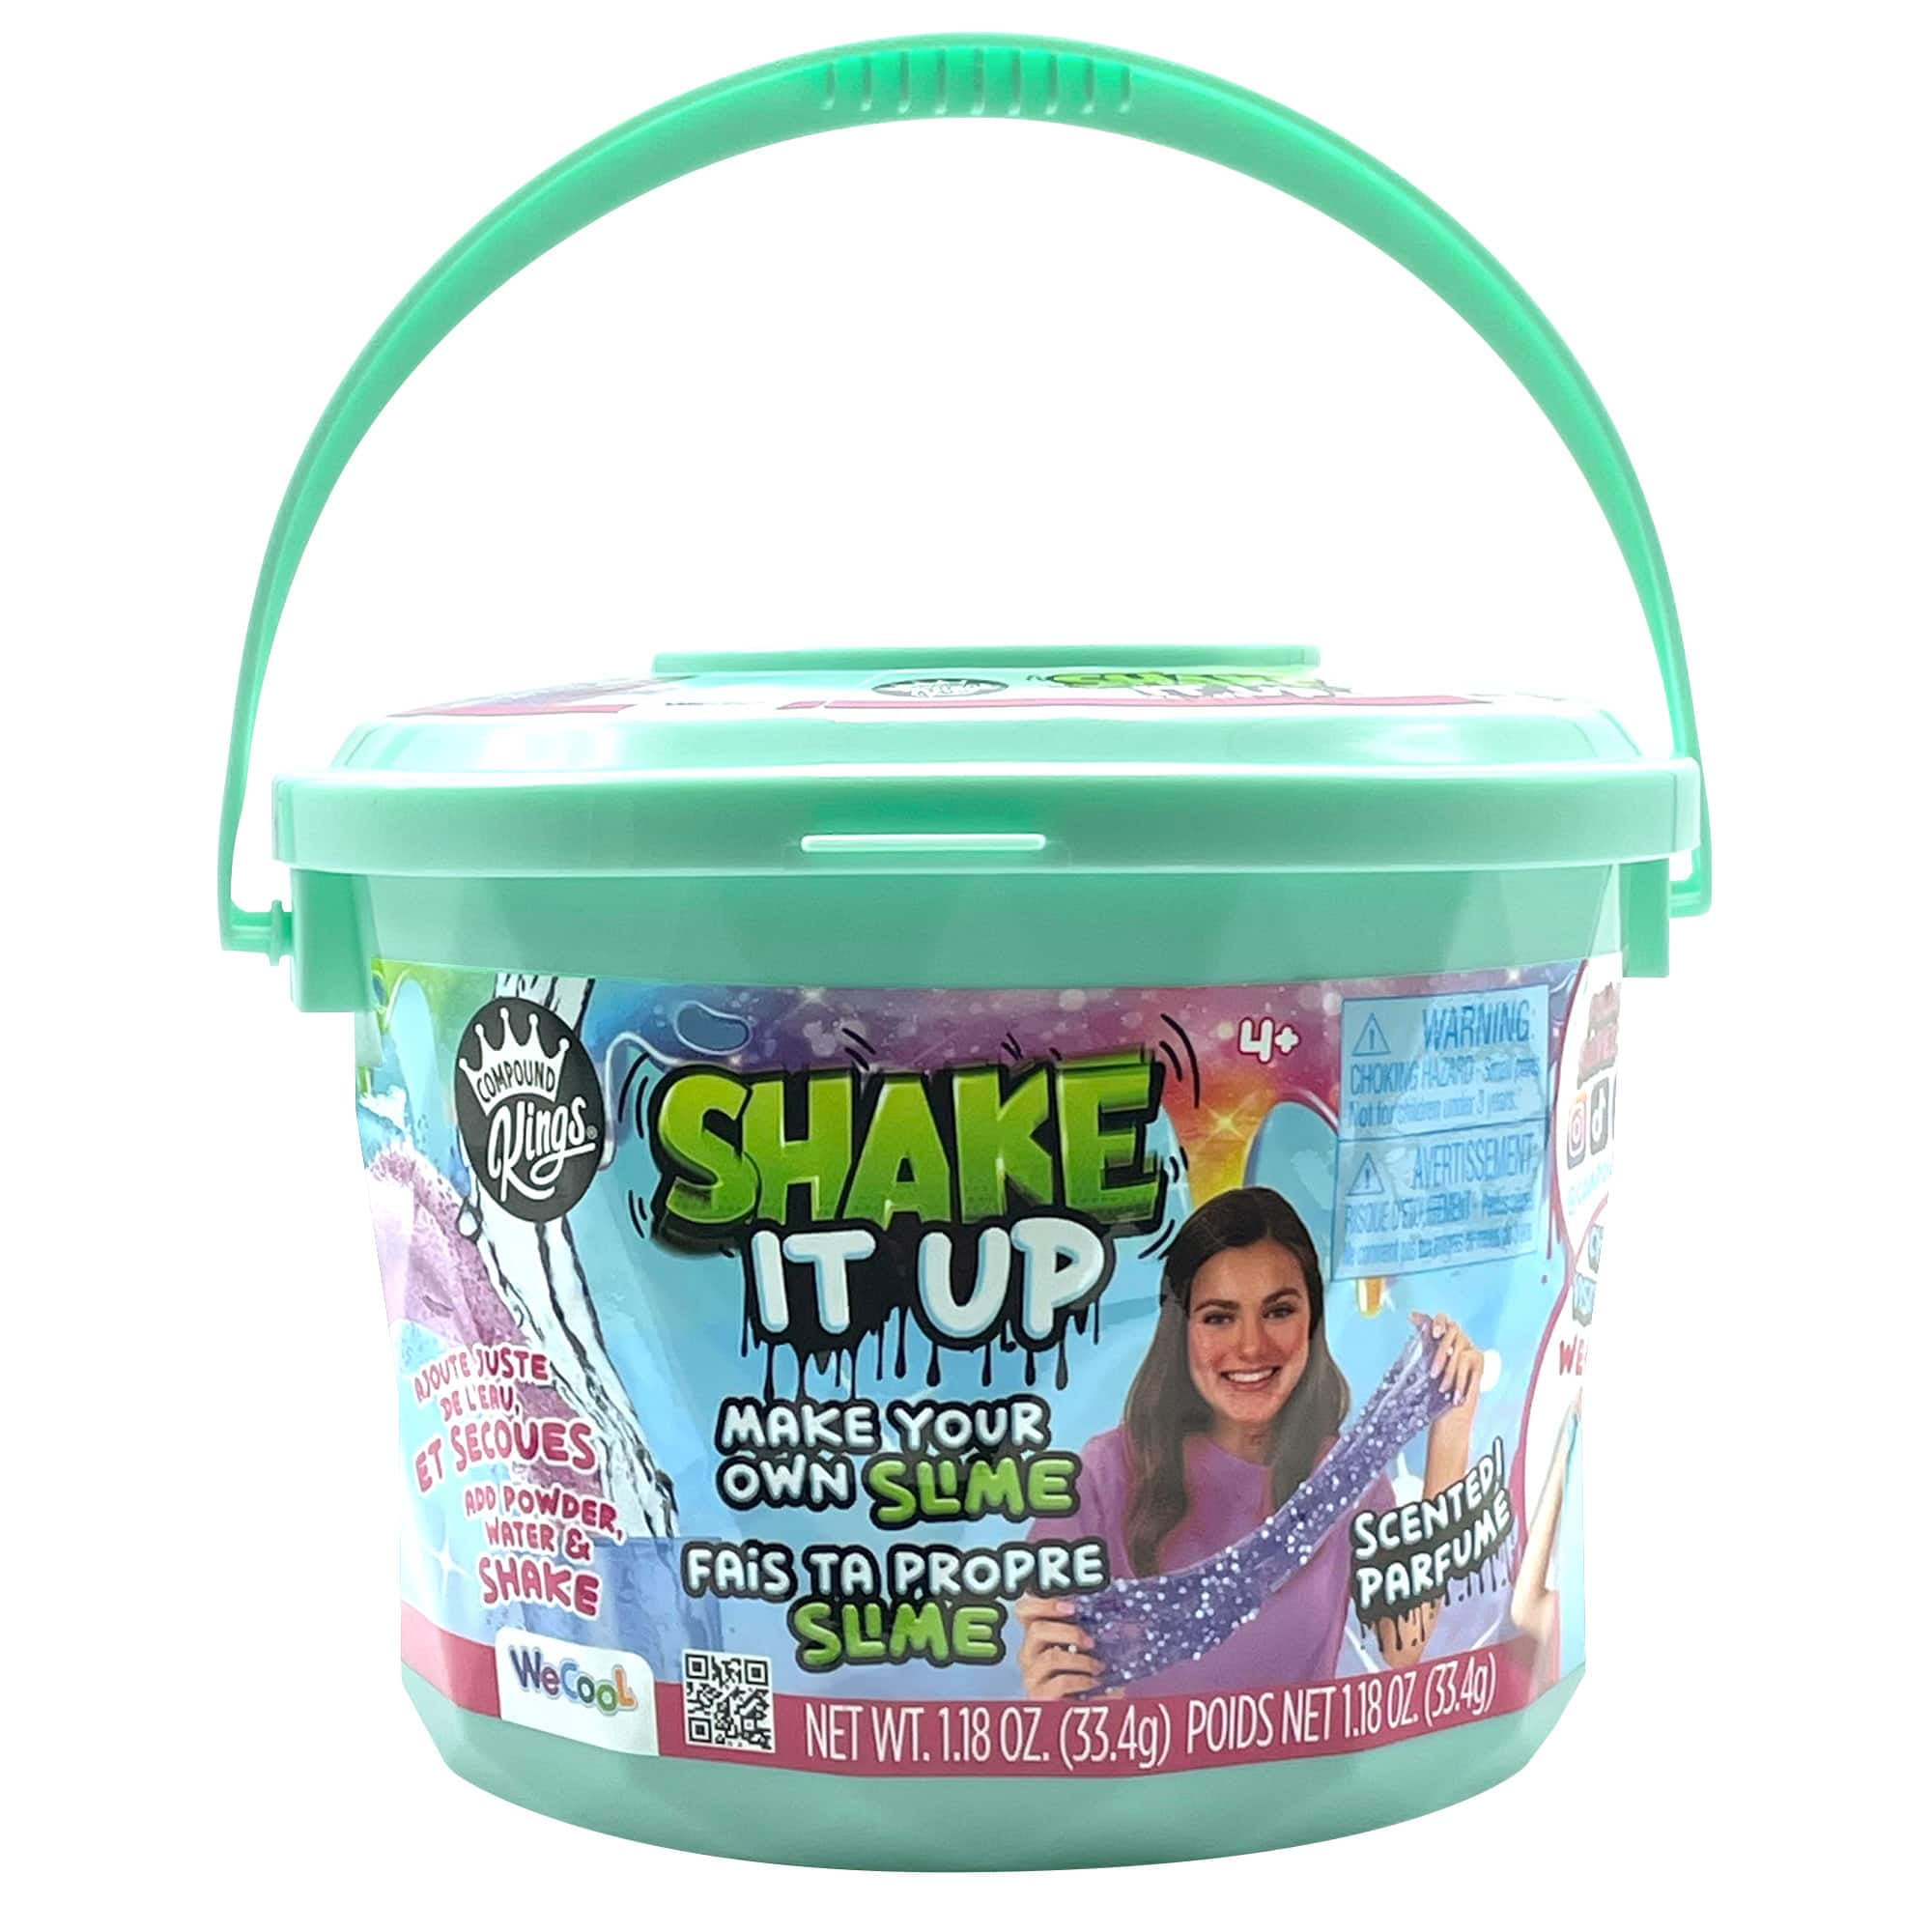 Horizon Create Your Own Unicorn Putty Just Mix and Play, Glitter Moons Mica  Powder Included 